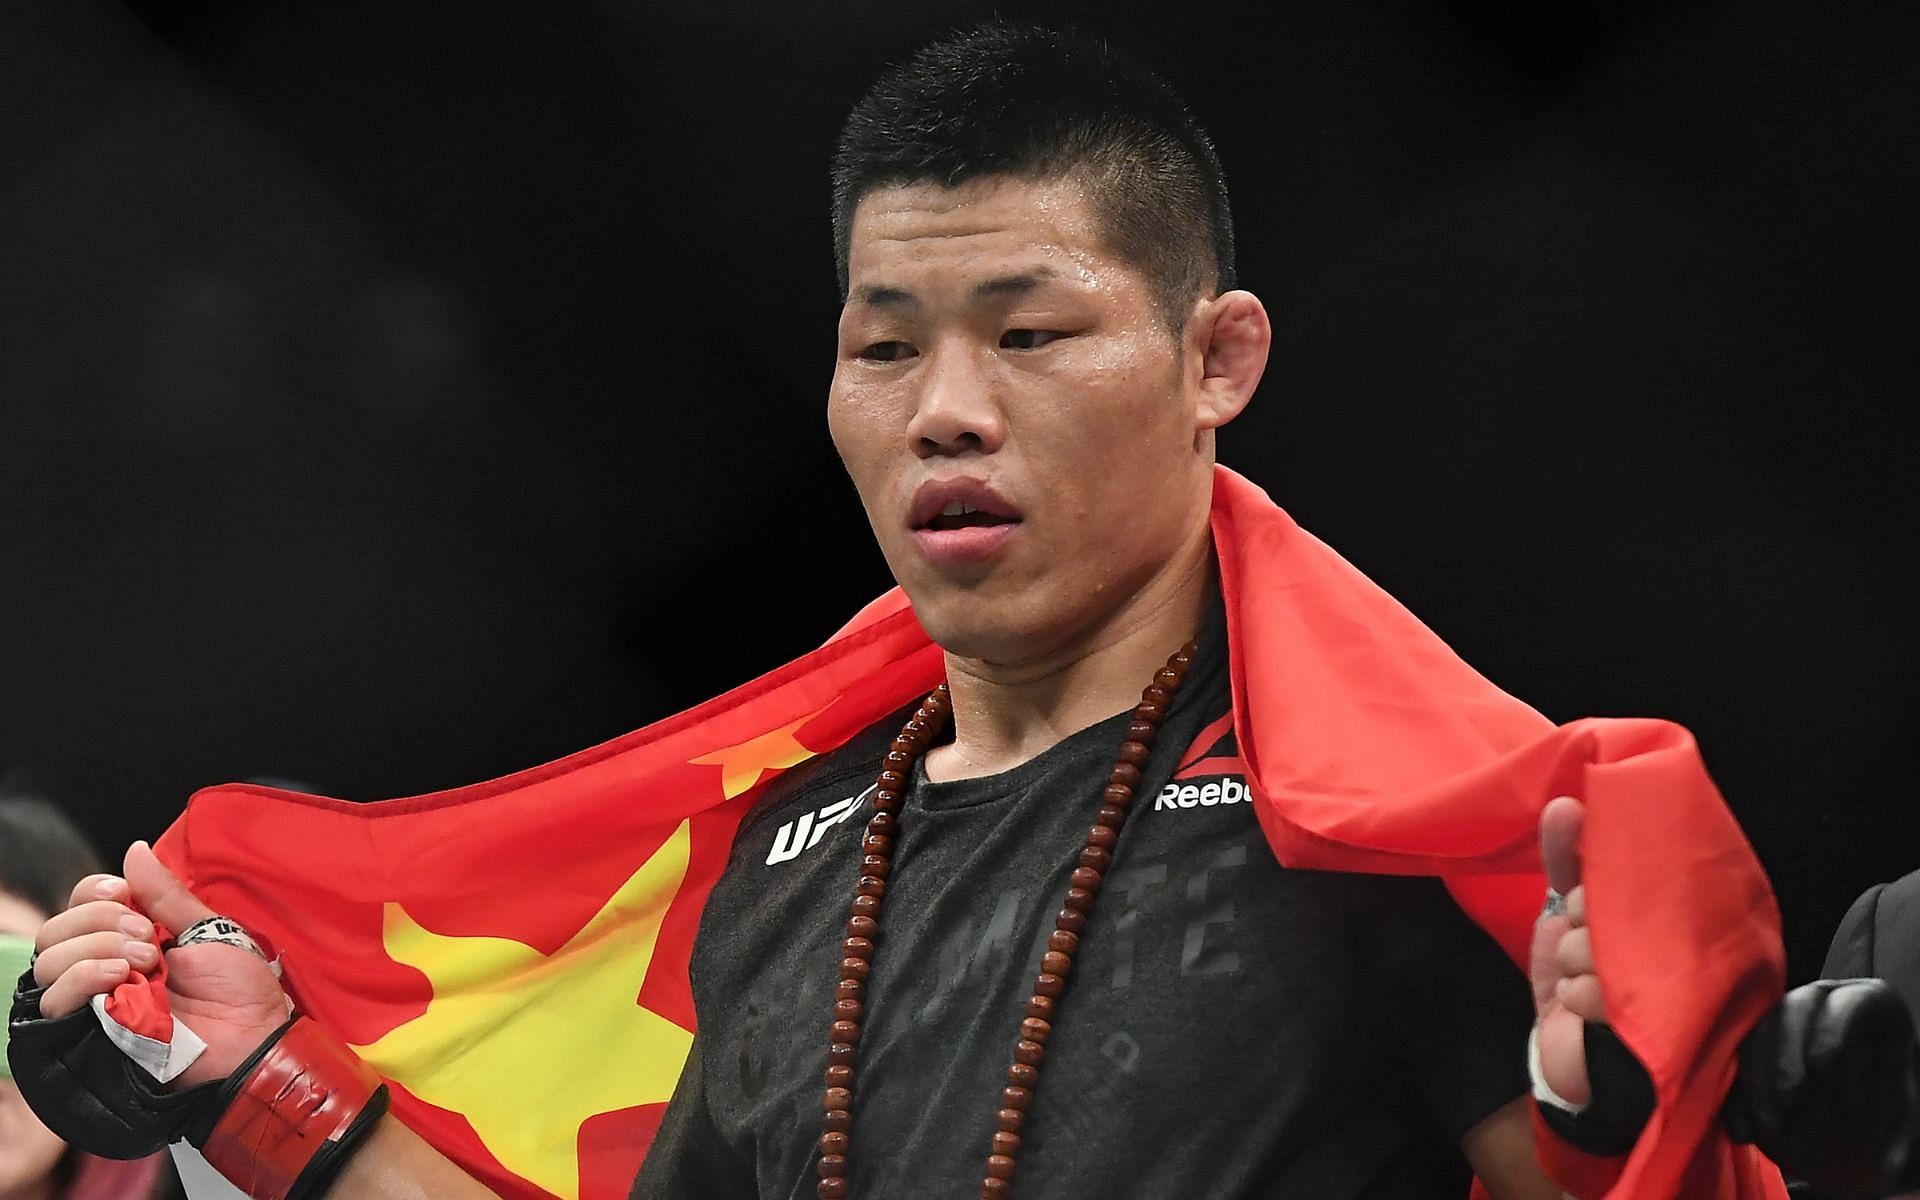 Li Jingliang is one of the most prolific finishers in the welterweight division today